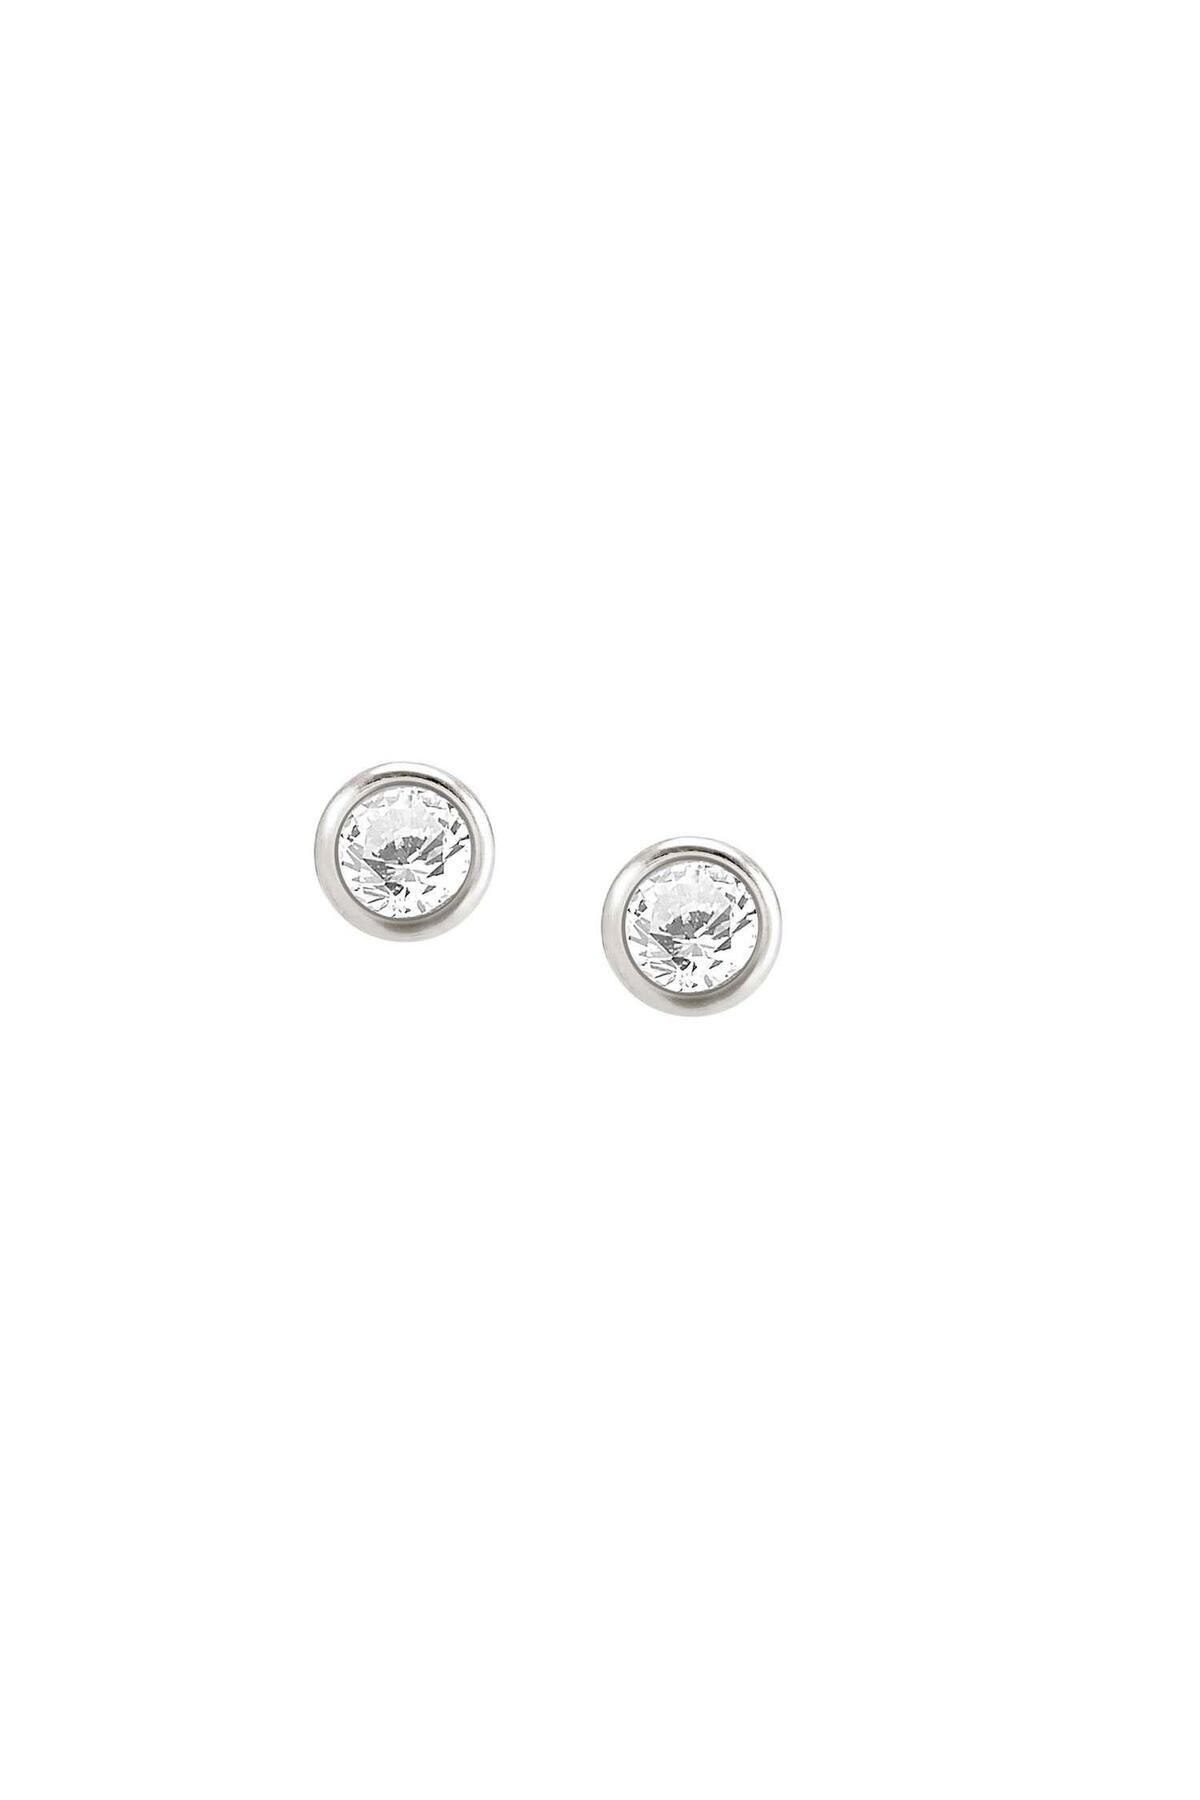 NOMİNATİON Nomination BELLA earrings ed,DETAILS,925 silver,CZ. Silver & gold